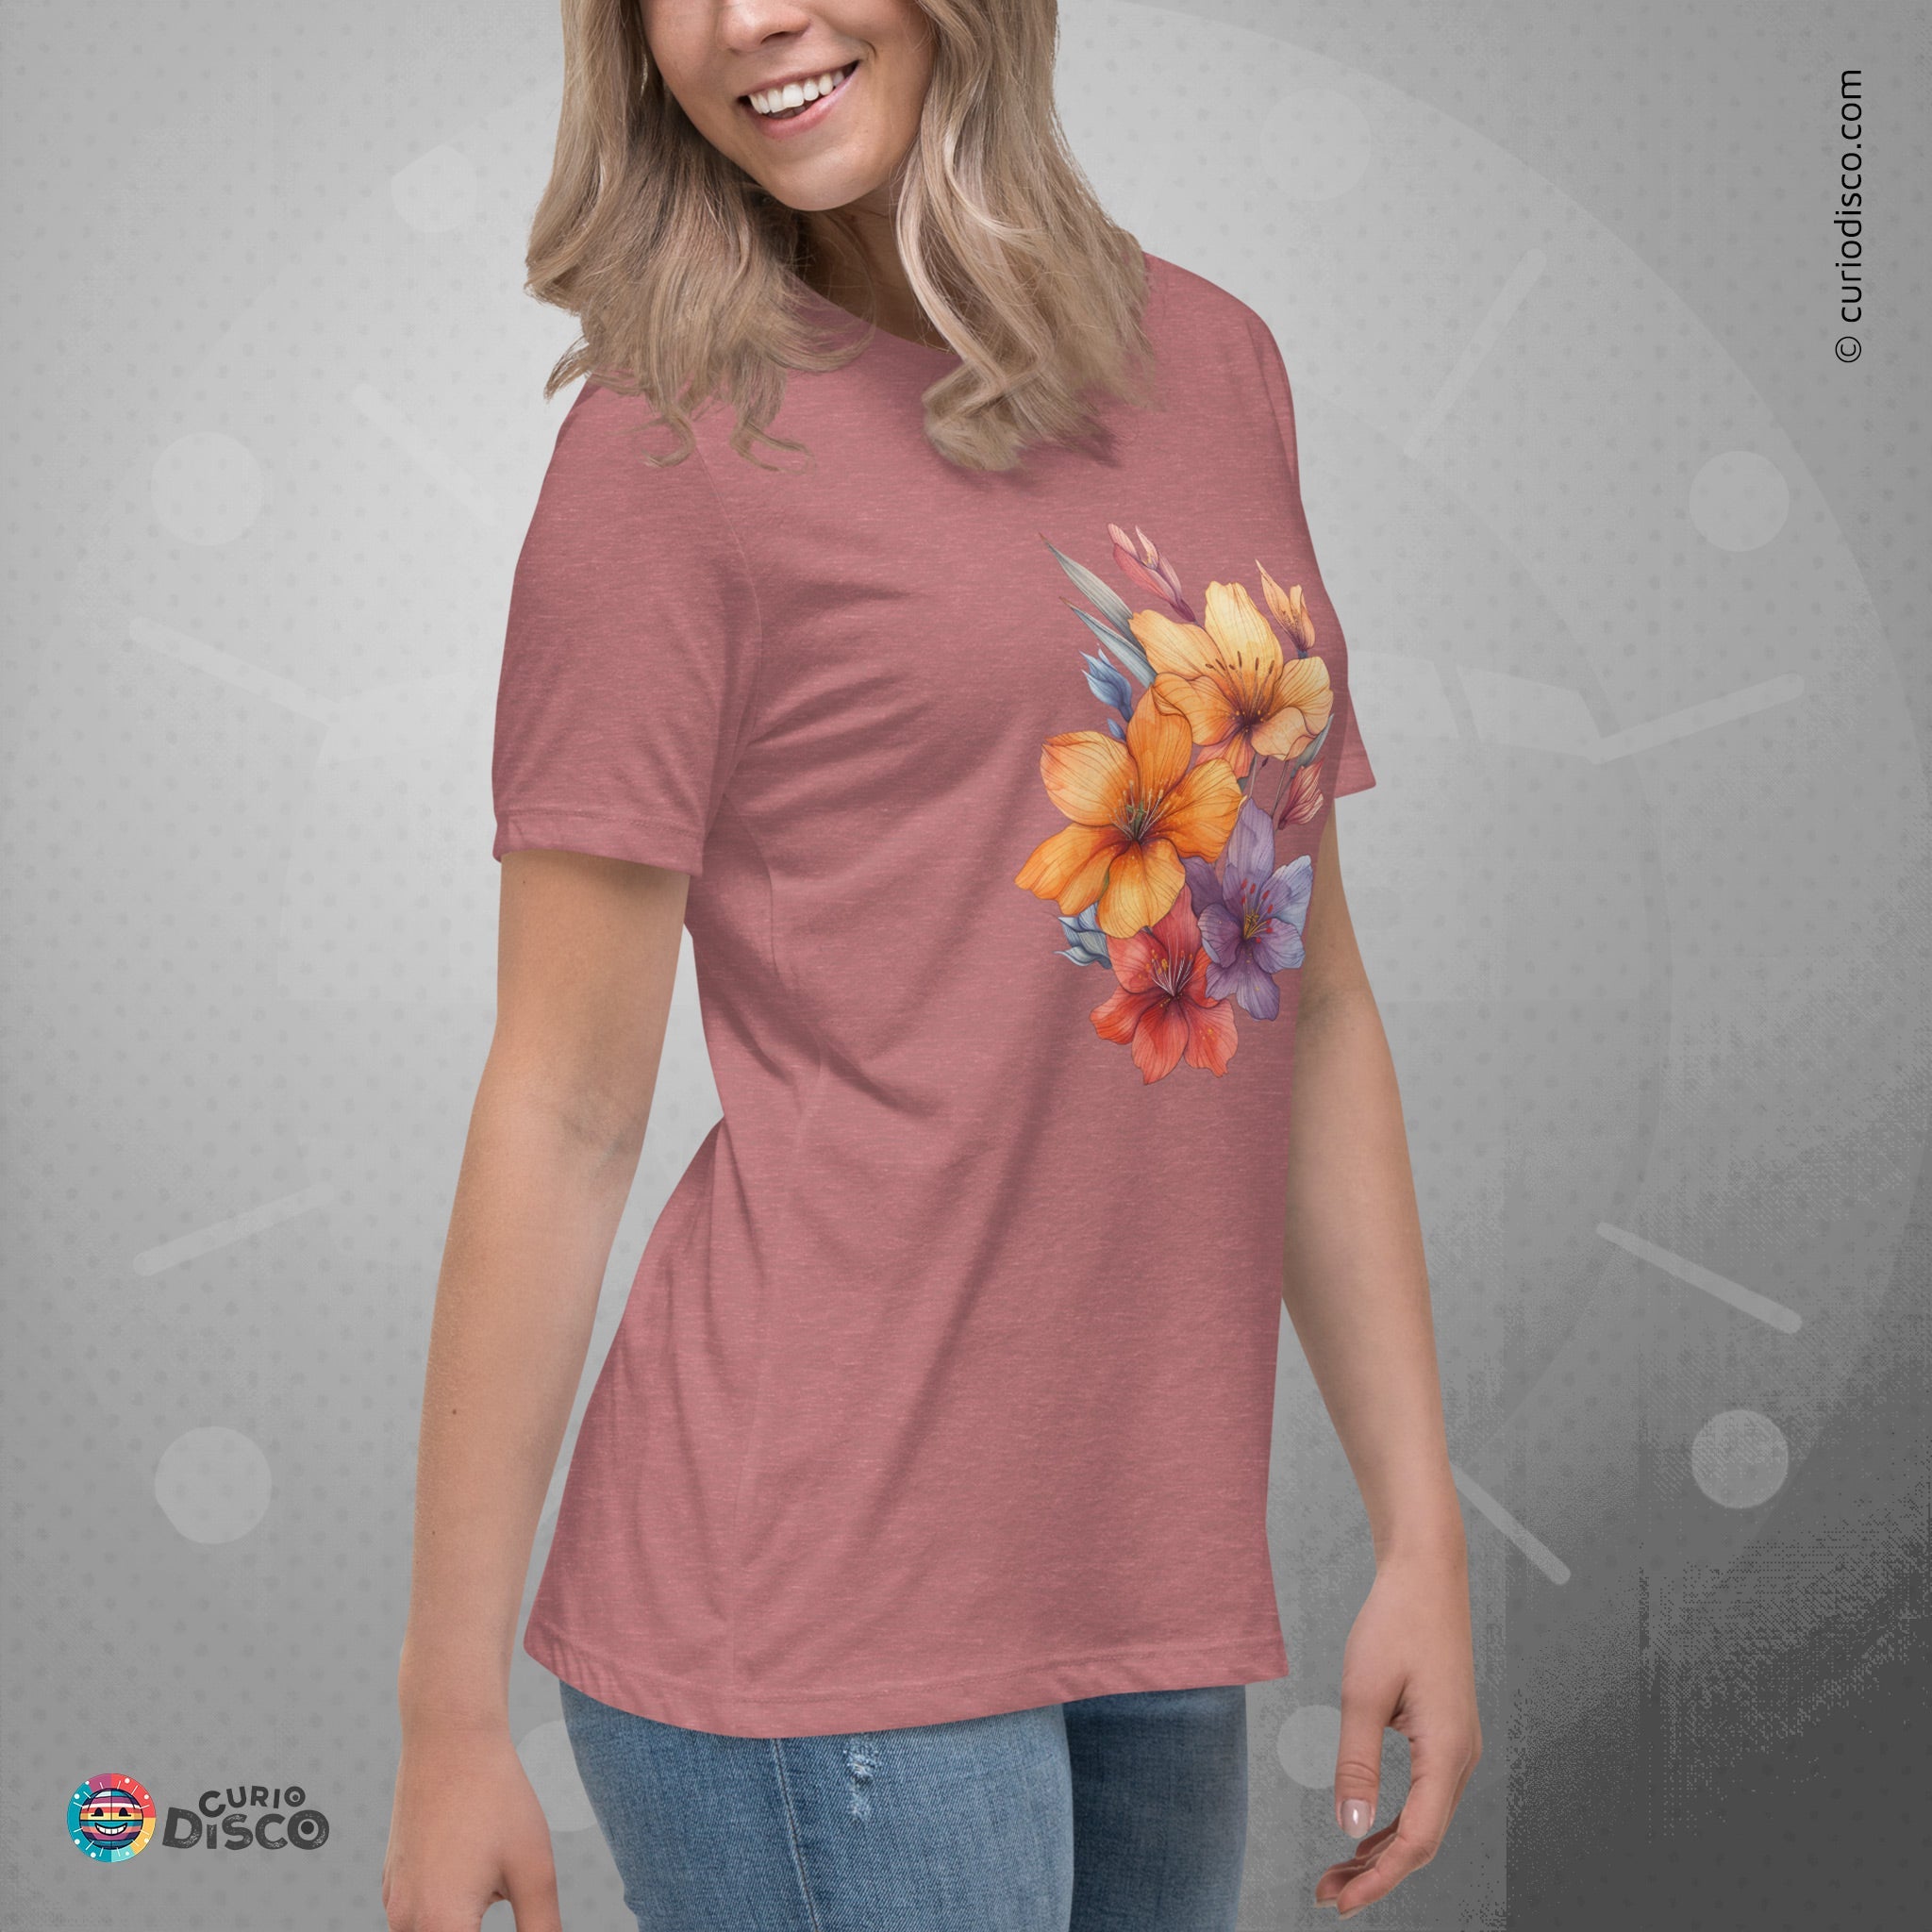 Cottagecore Crocus Flower Shirt, ideal as gifts for girlfriend, botanical shirt for Mother's Day gifts, fairycore style, grandma gift, featuring poppy, tulip, crocus in light academia design, perfect for Earth Day, gifts for mom